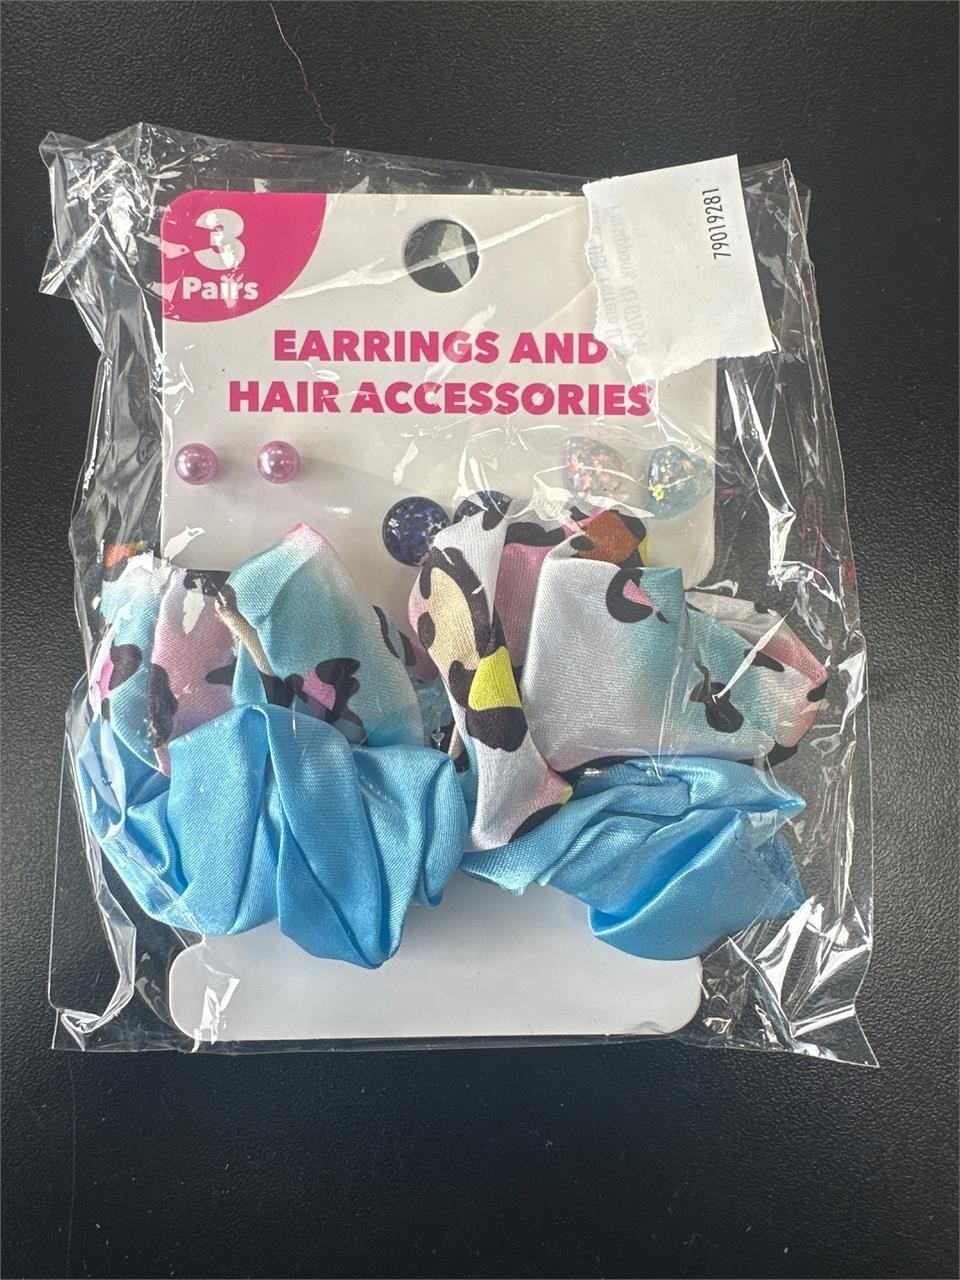 Earrings and hair accessories